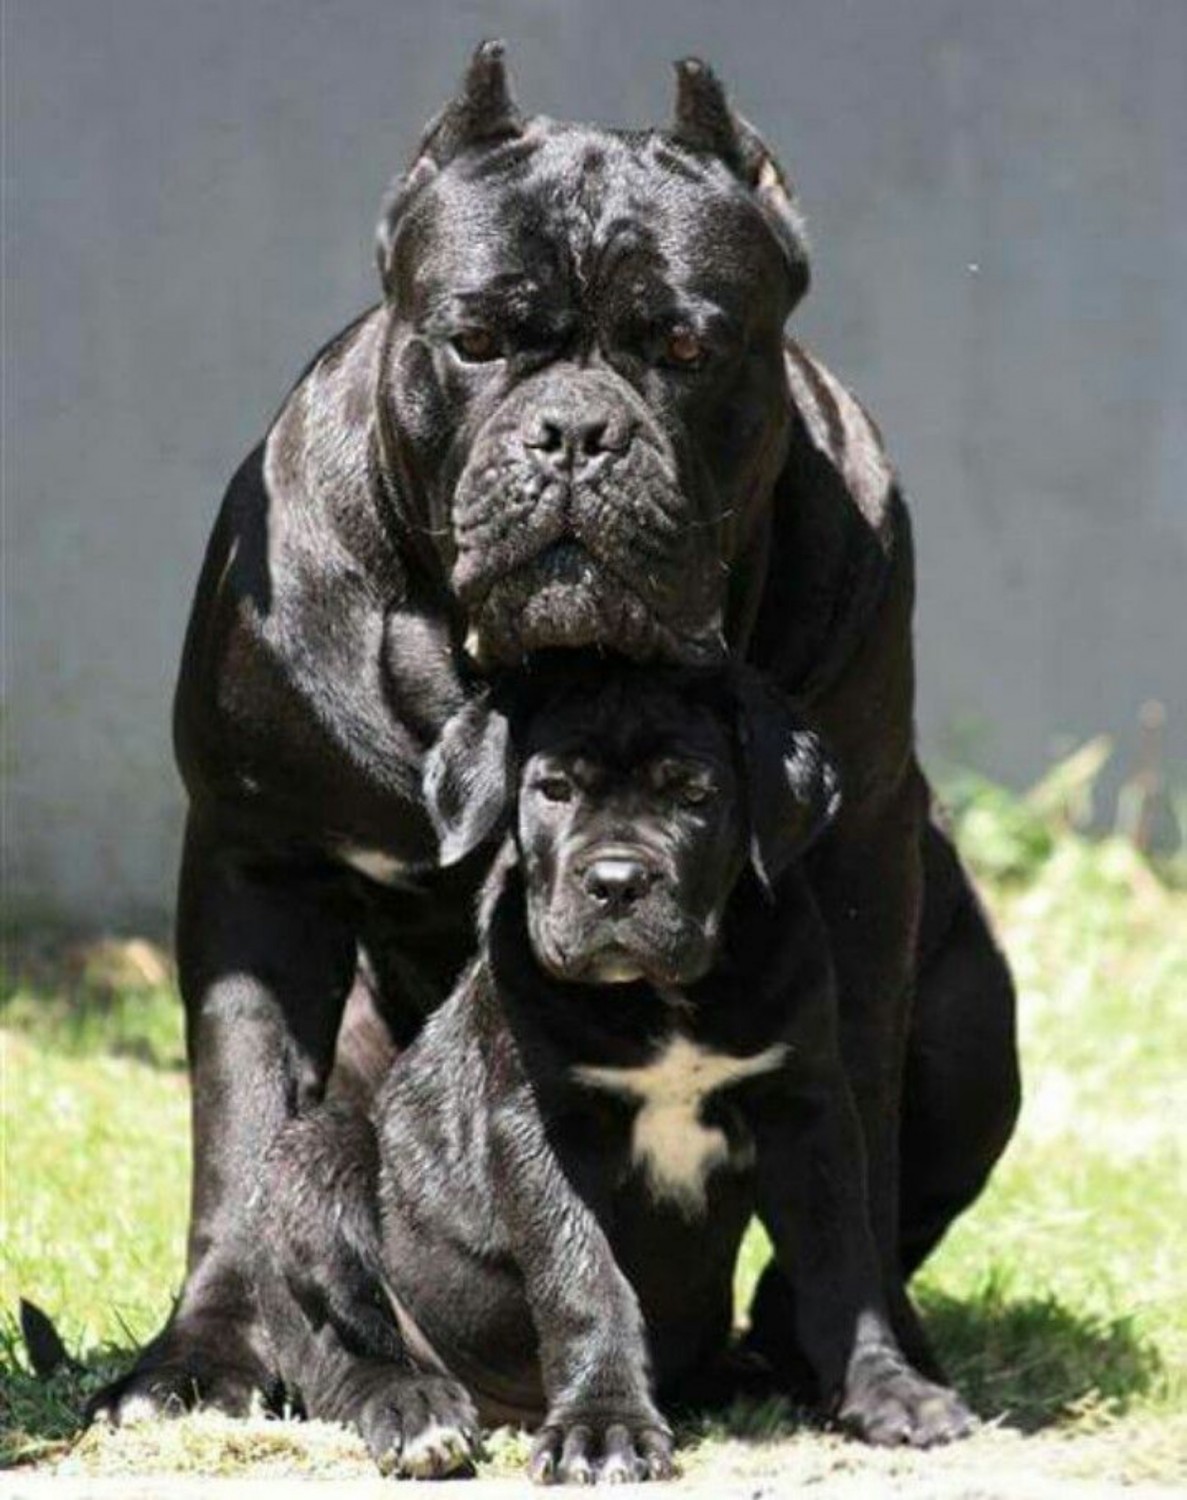 Cane Corso Dog Breed Information, Images, Characteristics